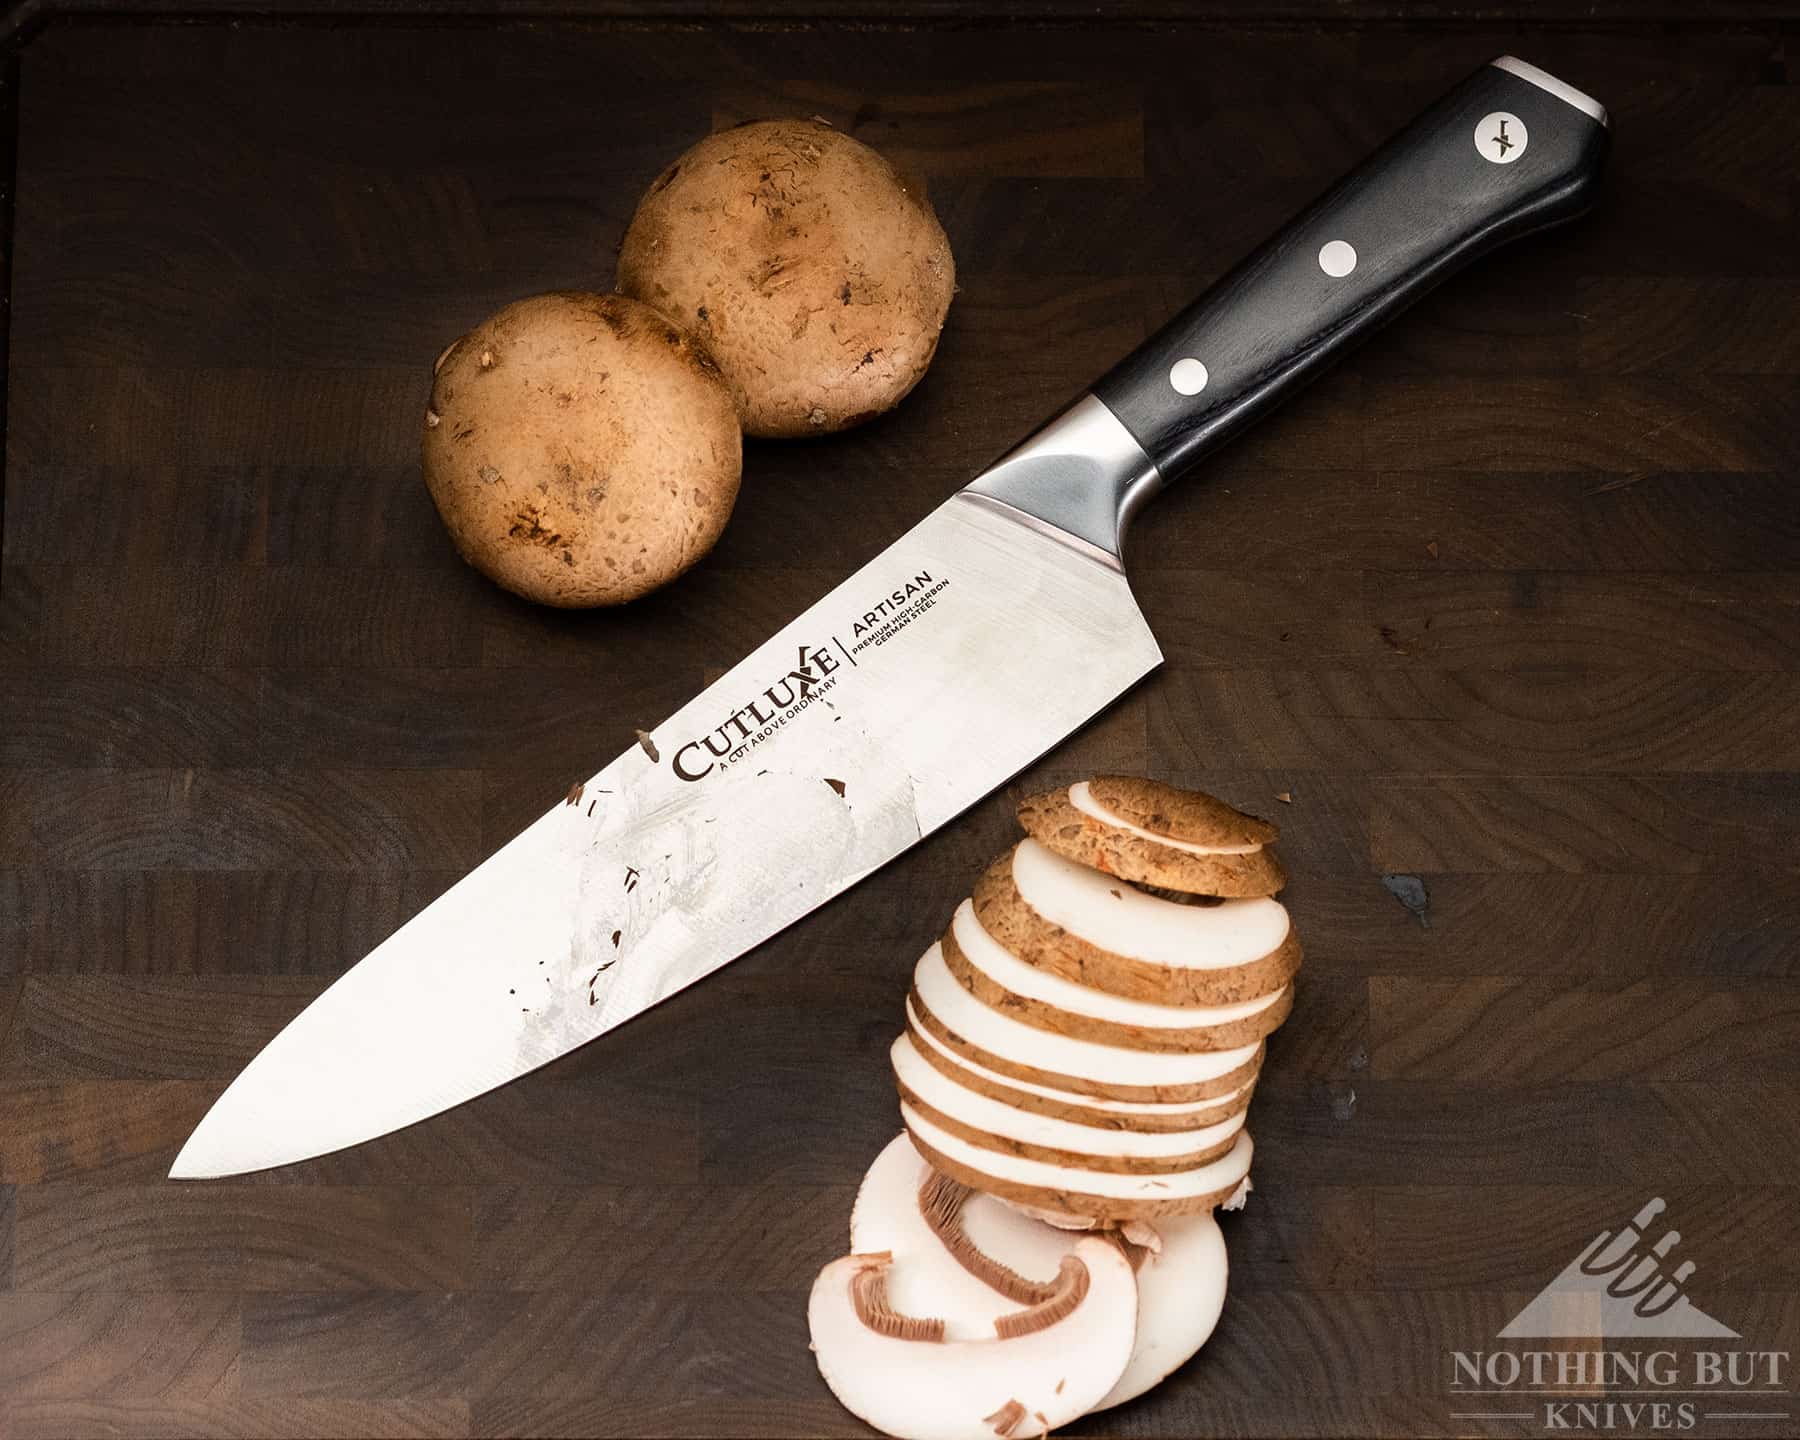 The performance of the Cutluxe Artisan chef knife matches much more expensive name brand cutlery. 